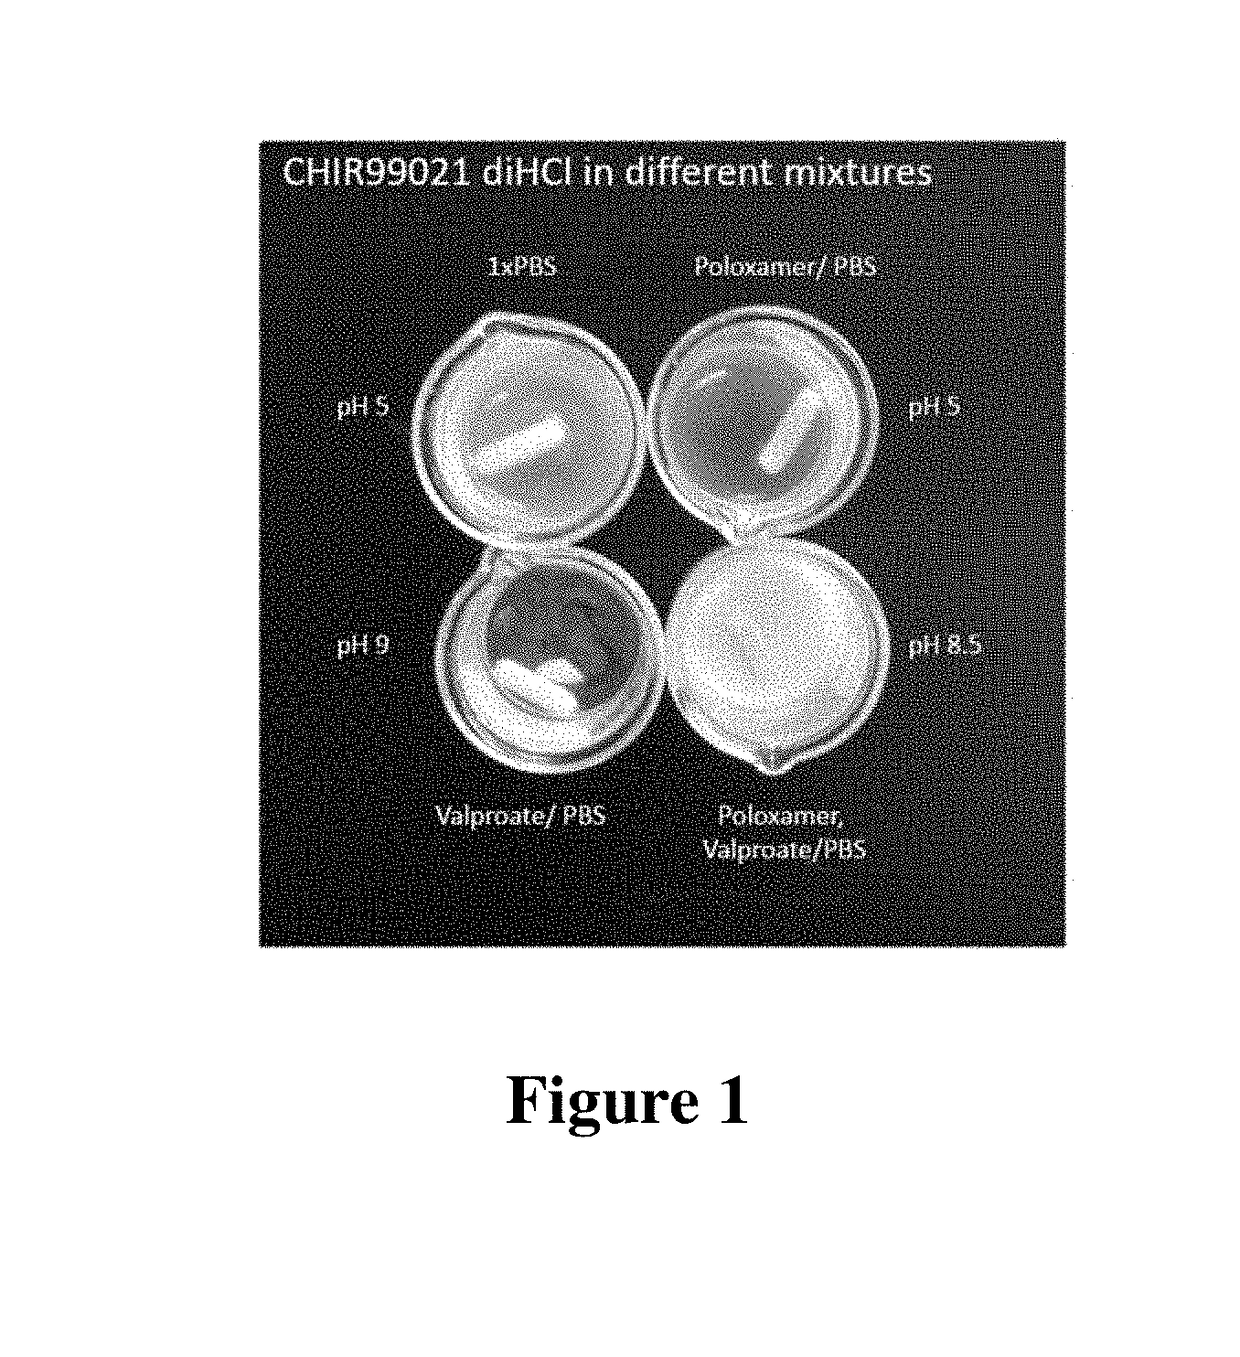 Solubilized compositions for controlled proliferation of stem cells / generating inner ear hair cells using gsk3 inhibitors: i